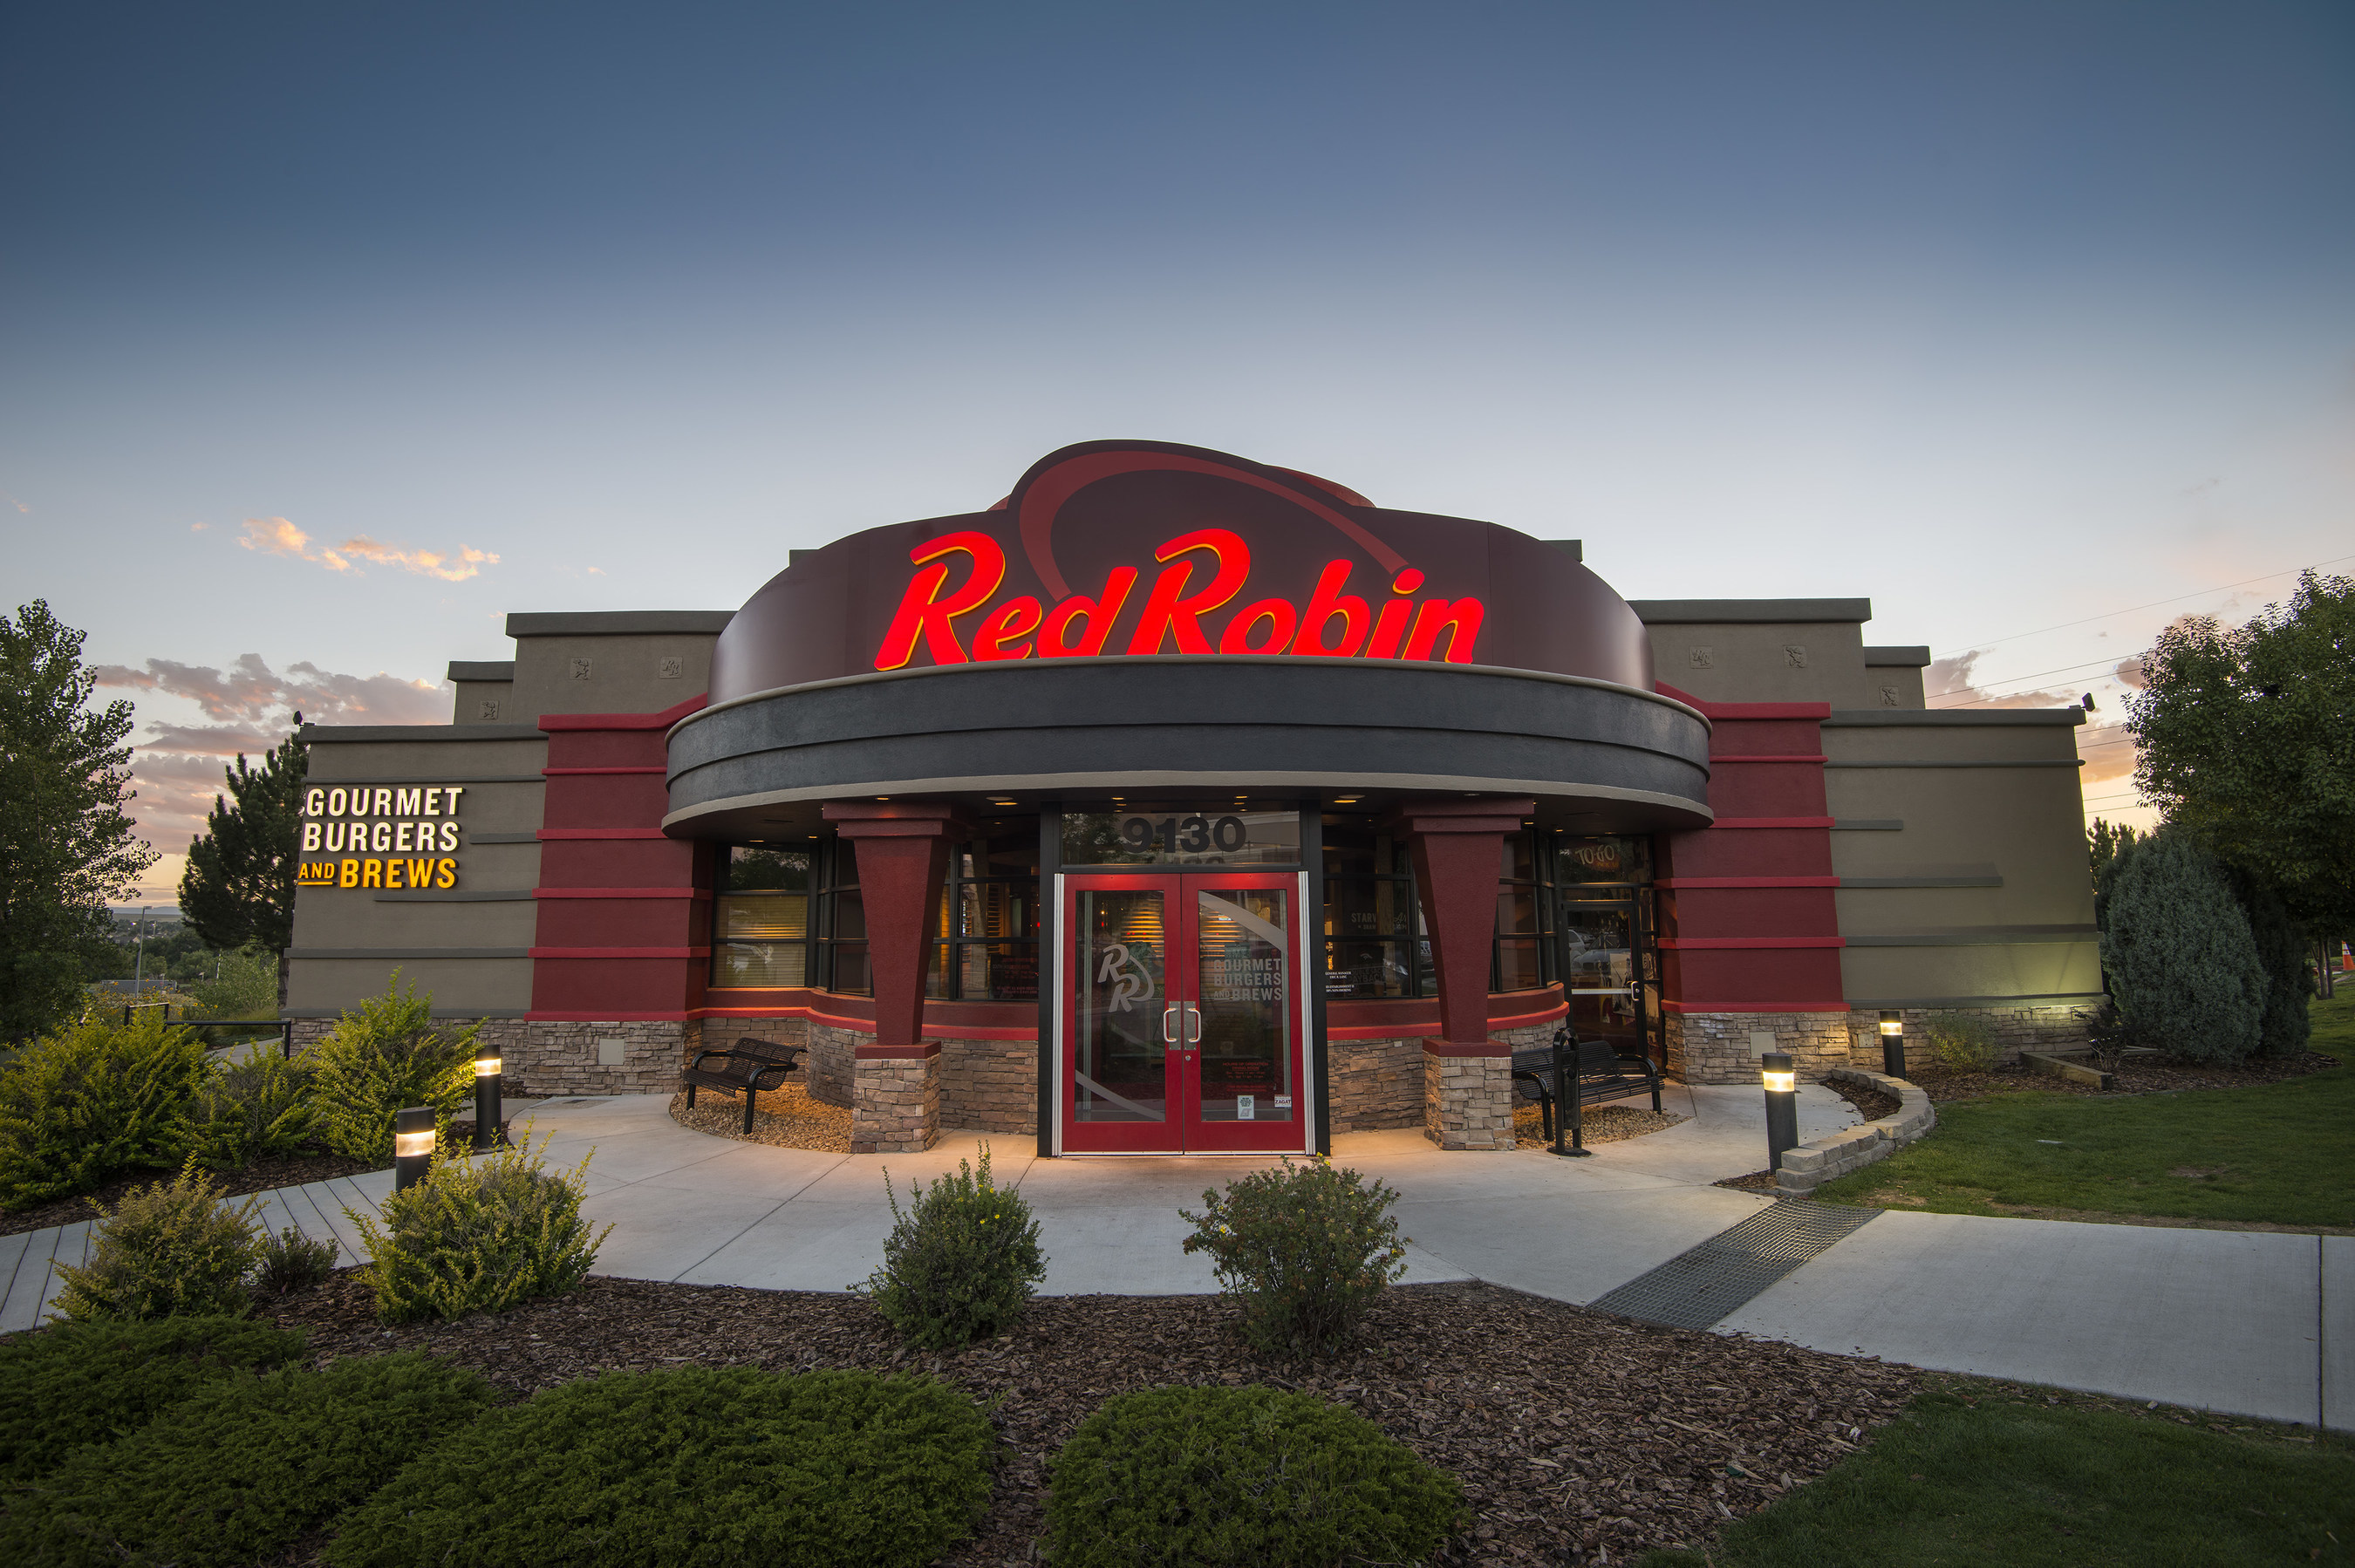 Red Robin Gourmet Burgers and Brews restaurant exterior. Red Robin Gourmet Burgers and Brews is a casual dining restaurant chain famous for serving more than two dozen craveable, high-quality burgers with Bottomless Steak Fries(R) in a fun environment welcoming to guests of all ages.